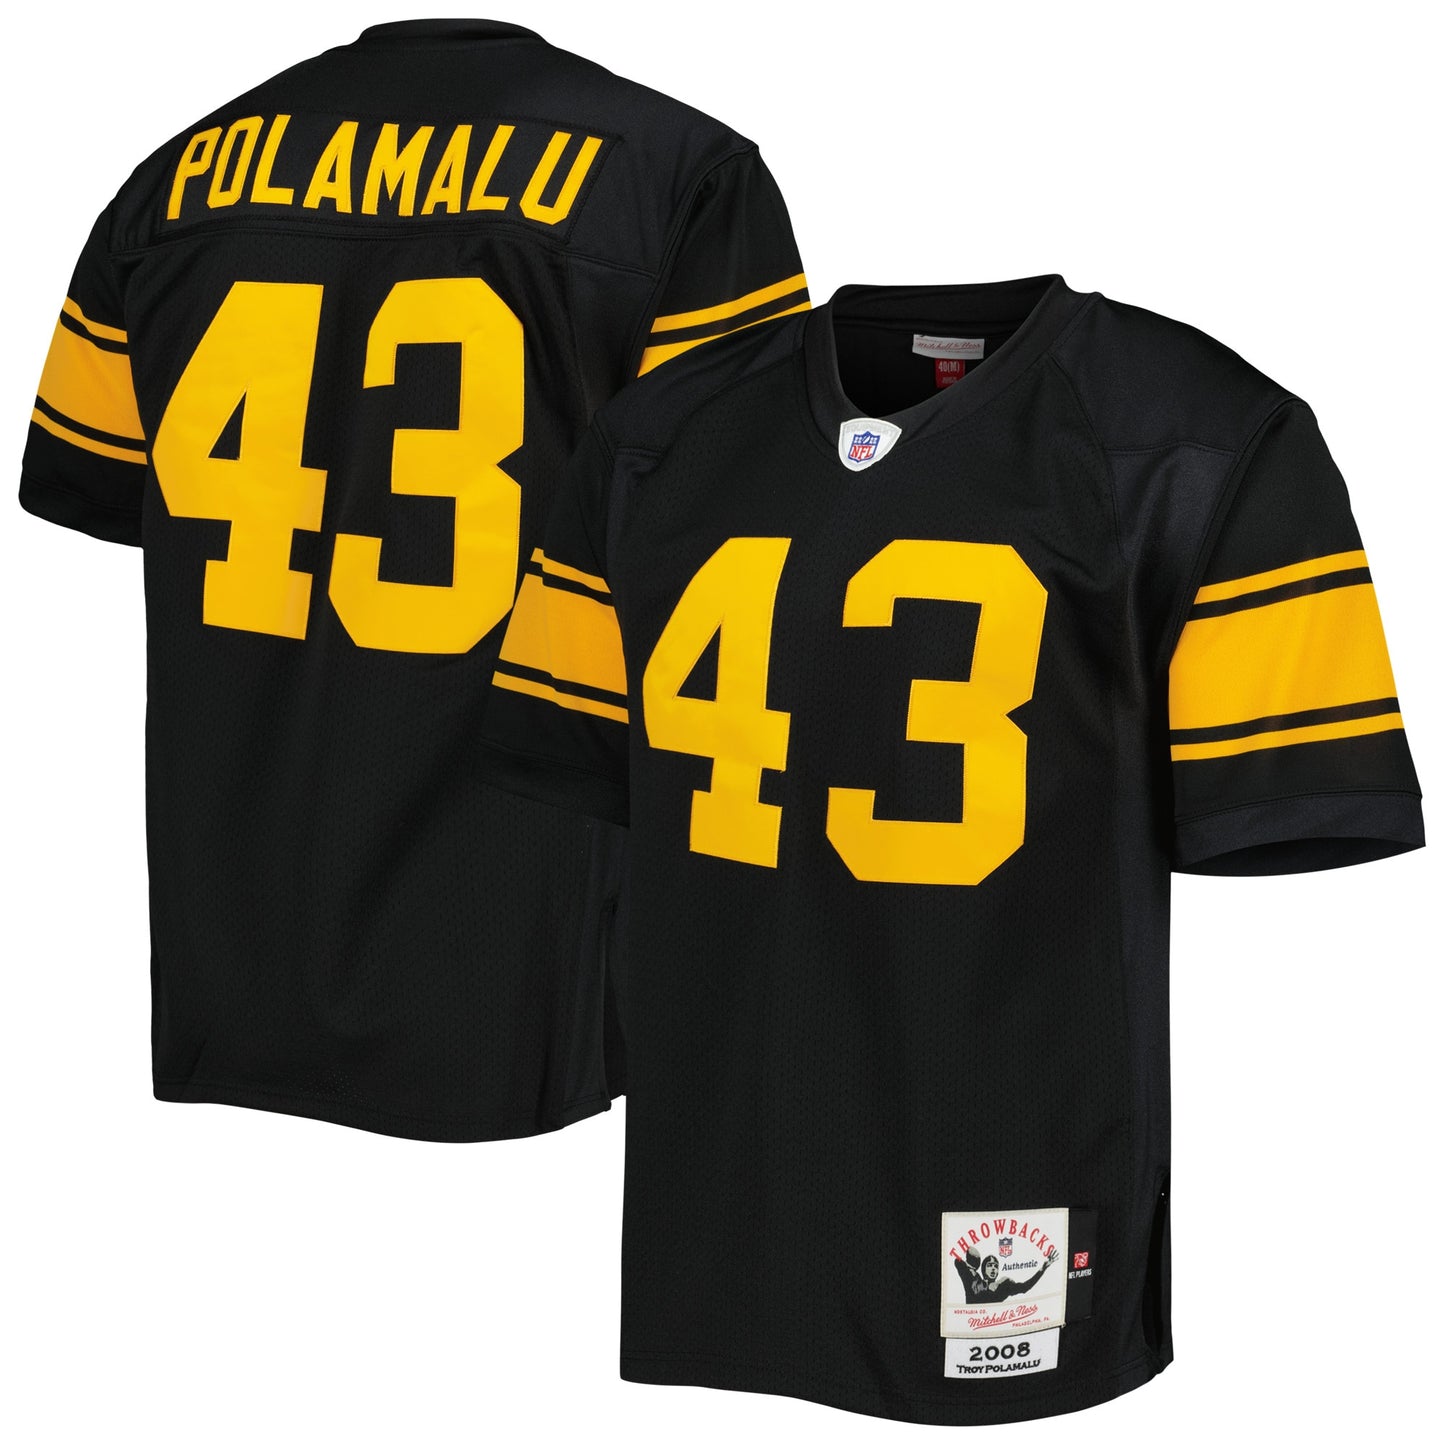 Troy Polamalu Pittsburgh Steelers Mitchell & Ness 2008 Alternate Authentic Retired Player Jersey - Black